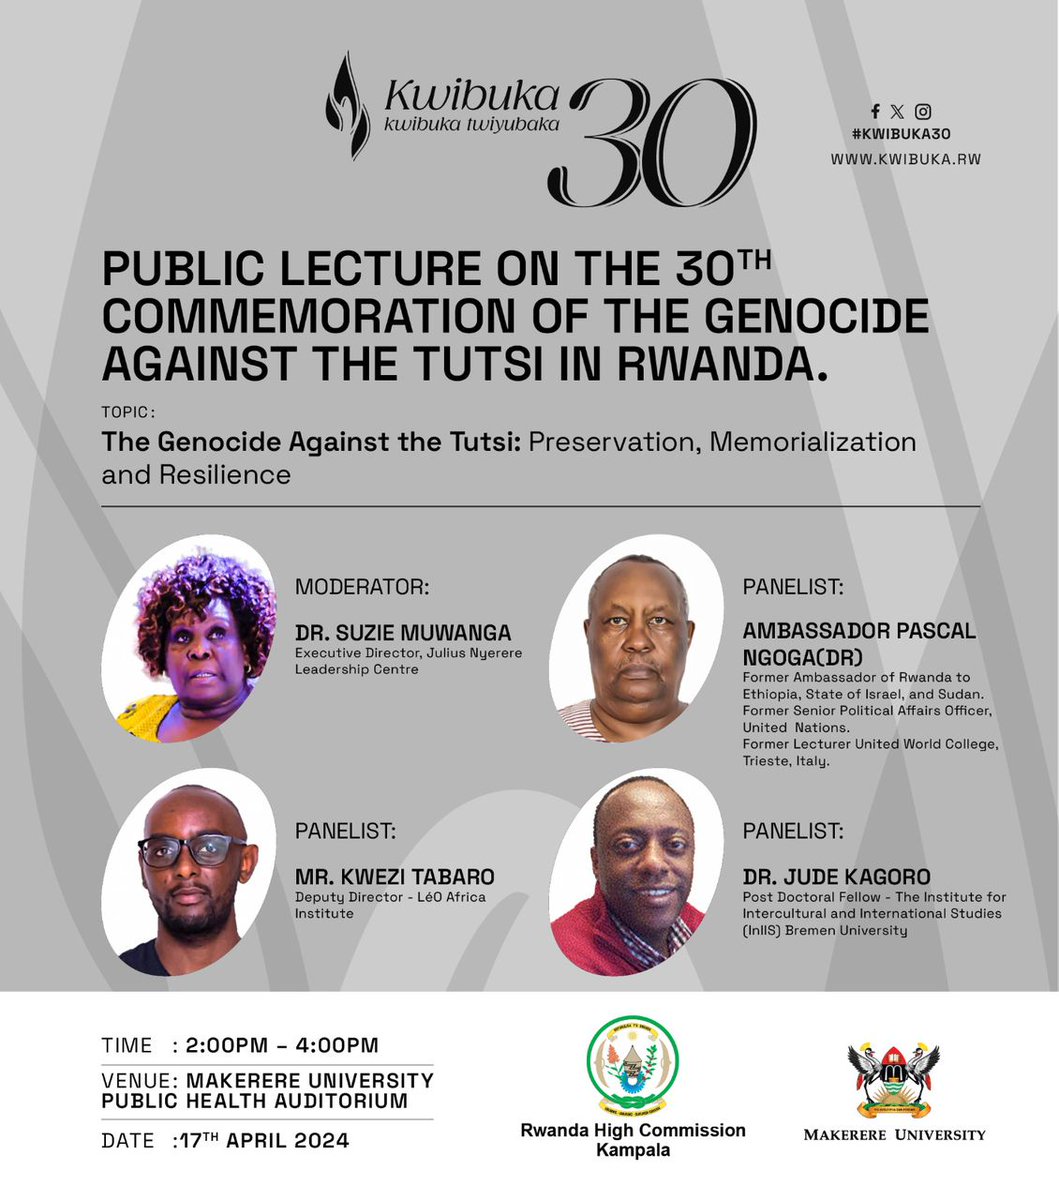 Our Deputy Director @Kwezi_Tabaro will join other distinguished panelists at a public lecture commemorating the Rwanda Genocide. 🗓️Date: Tomorrow, 17th April 2024, 2:00 pm - 4:00 pm. 📍Venue: School of Public Health Auditorium, Makerere University. #Kwibuka30